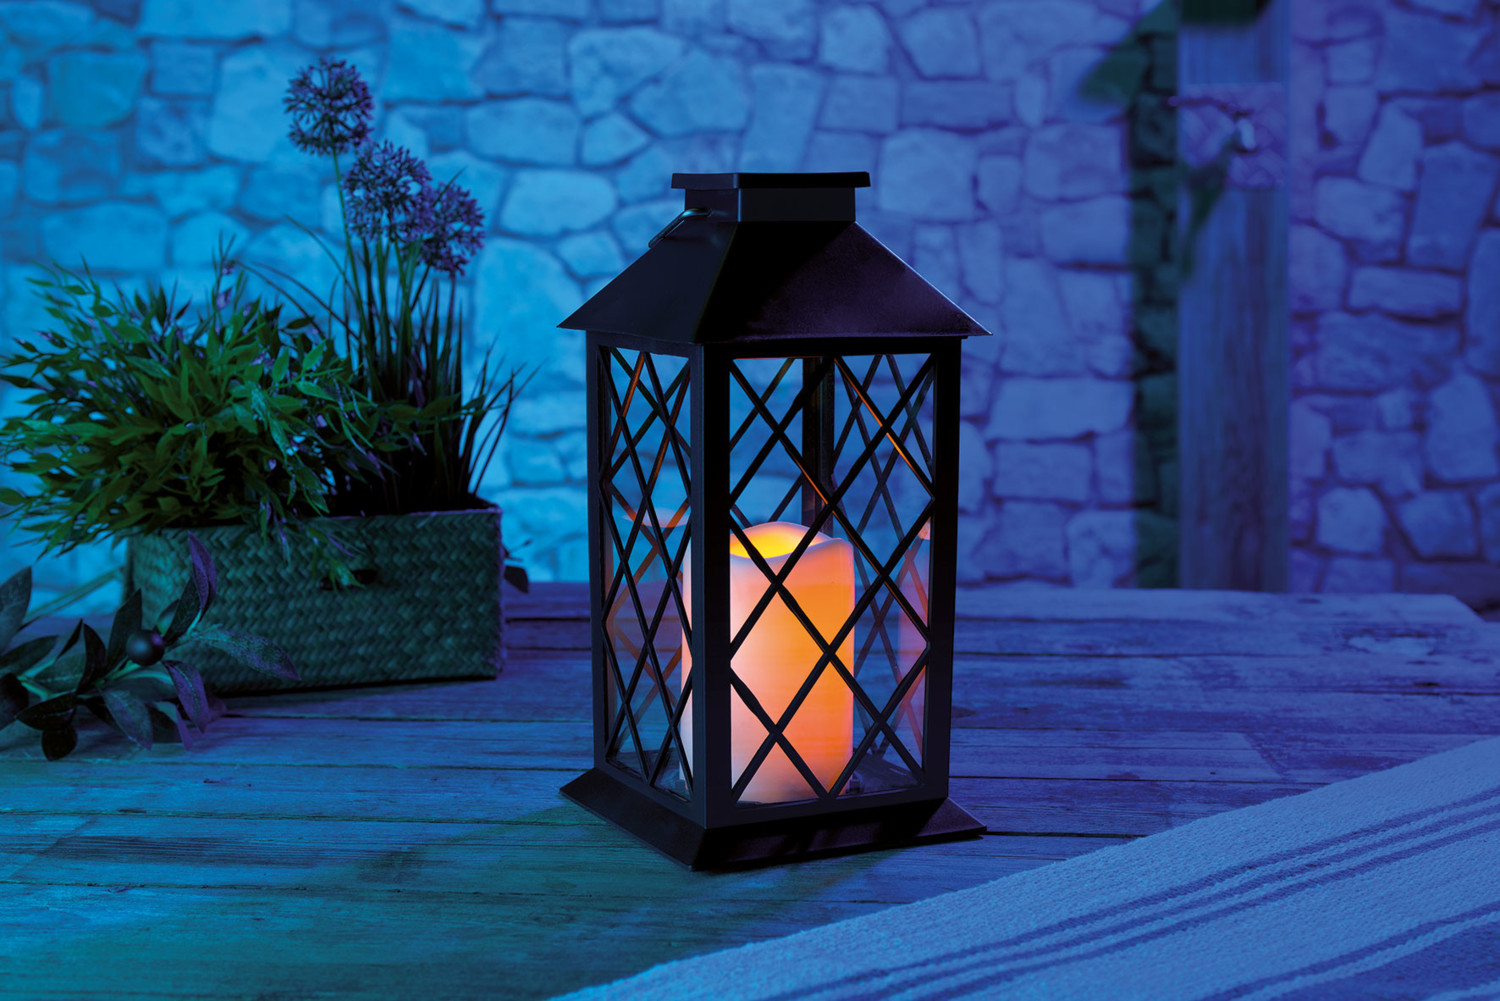 Lampe solaire bougie Candle Light, lampe solaire jardin